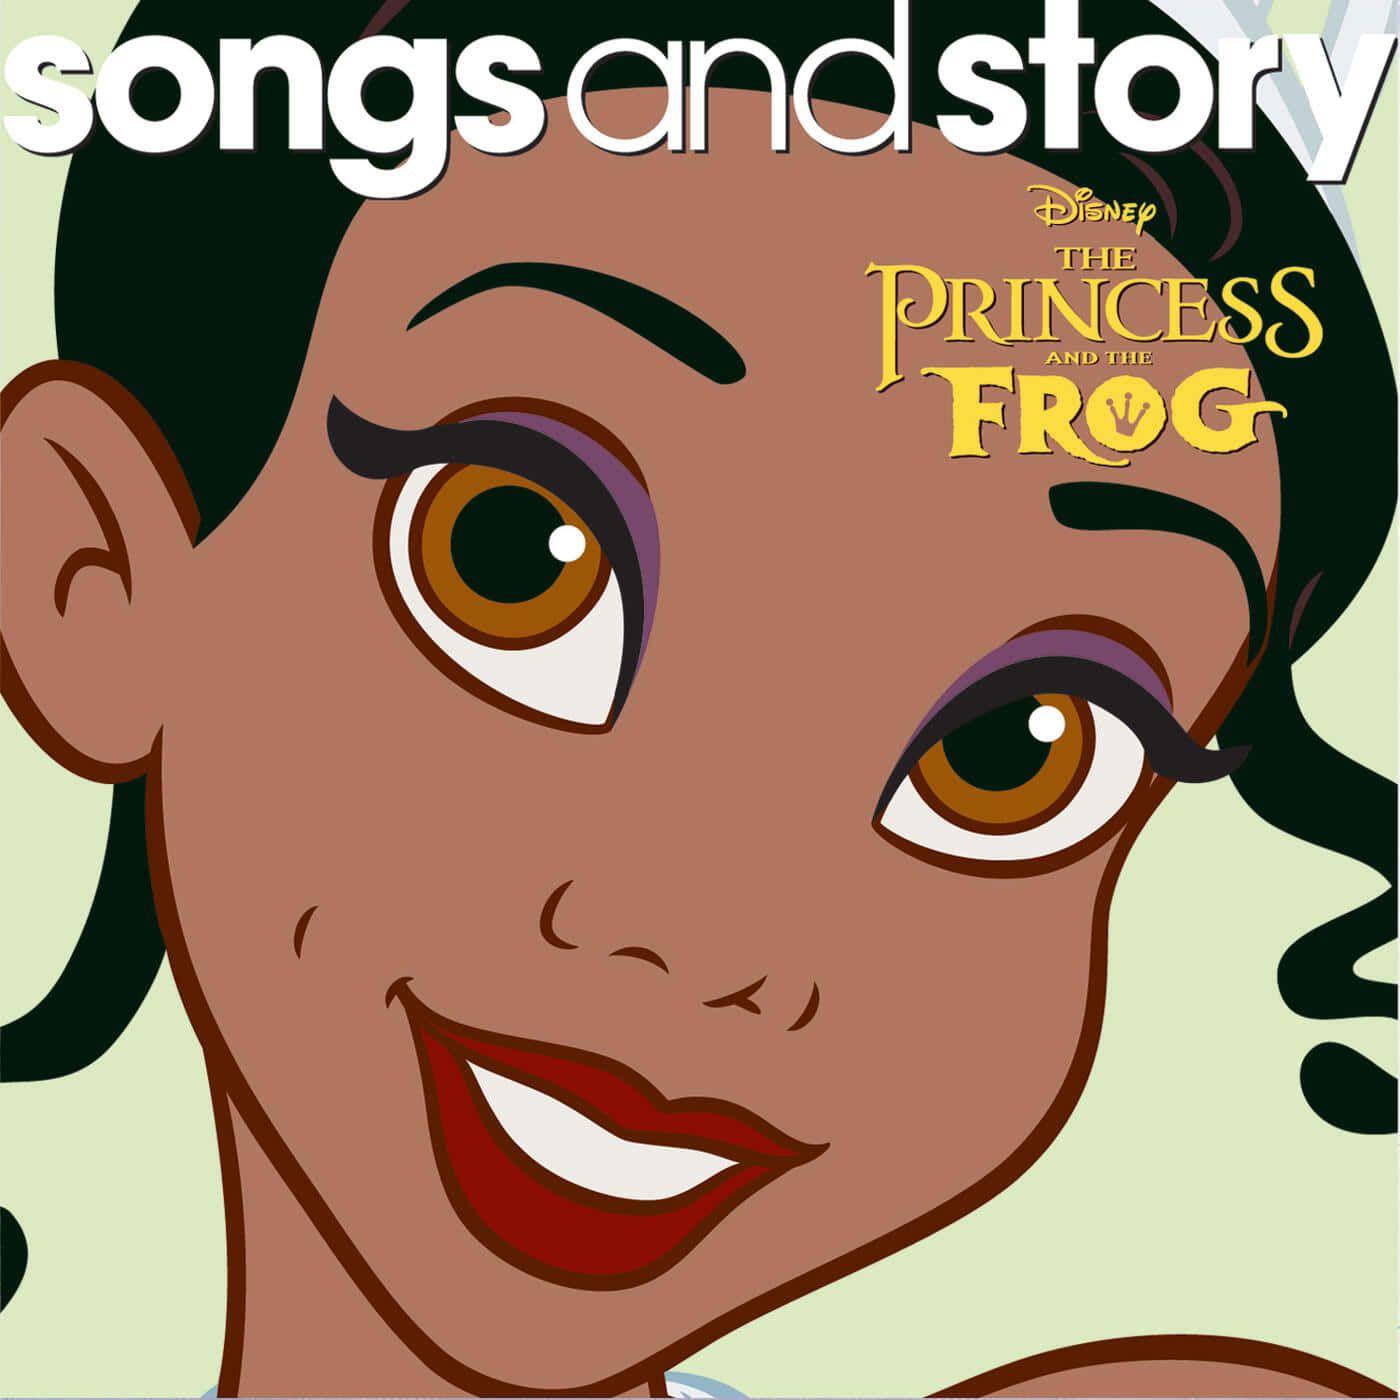 Princess Tiana and Prince Naveen as frogs in The Princess and the Frog